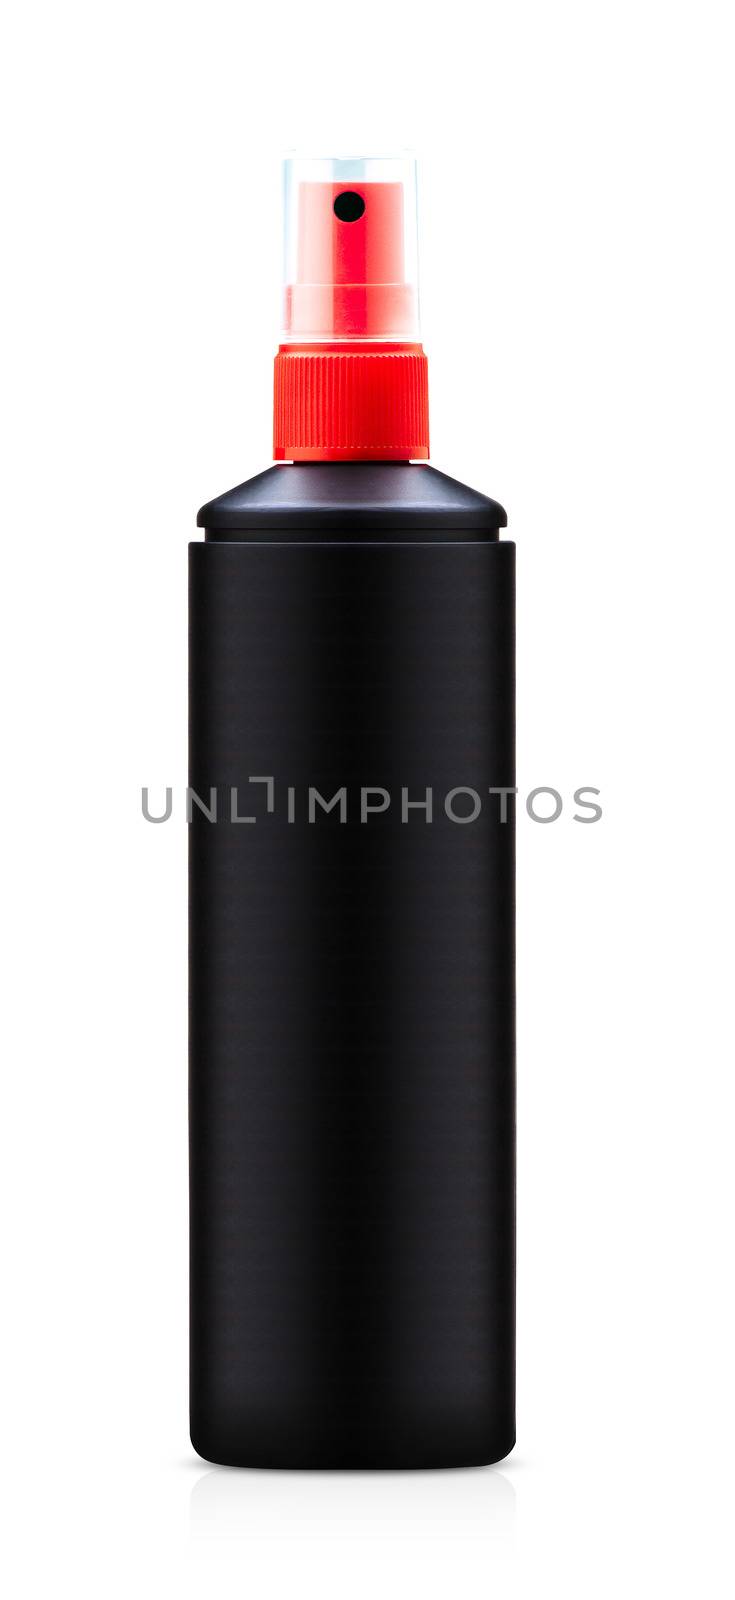 Spray Medicine Antiseptic Plastic Bottle on white background (with clipping work path)